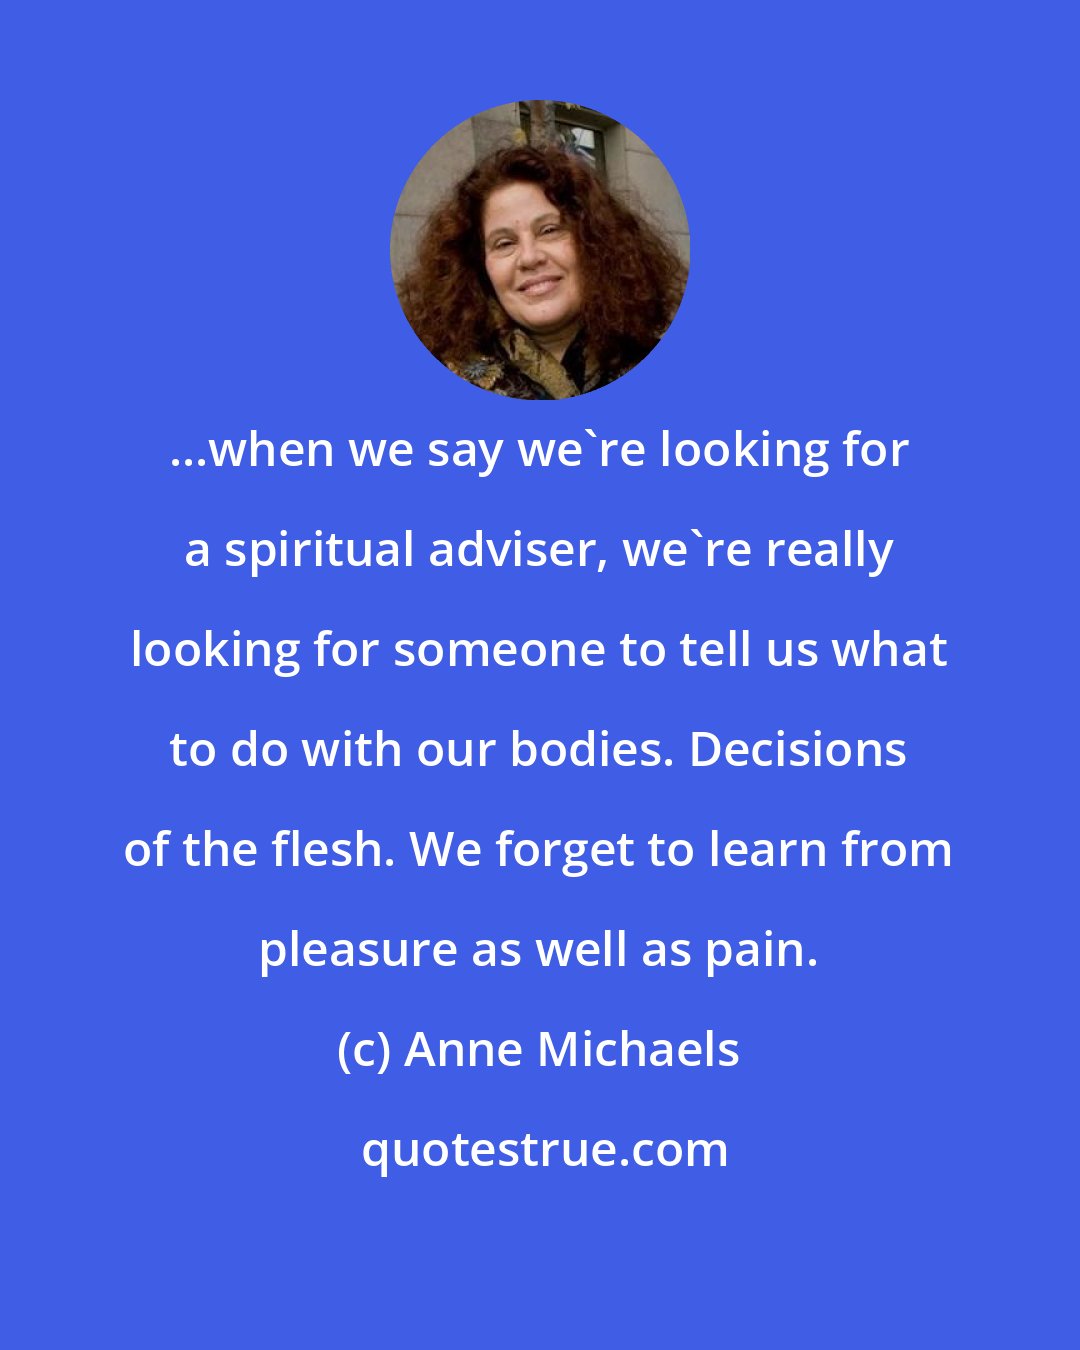 Anne Michaels: ...when we say we're looking for a spiritual adviser, we're really looking for someone to tell us what to do with our bodies. Decisions of the flesh. We forget to learn from pleasure as well as pain.